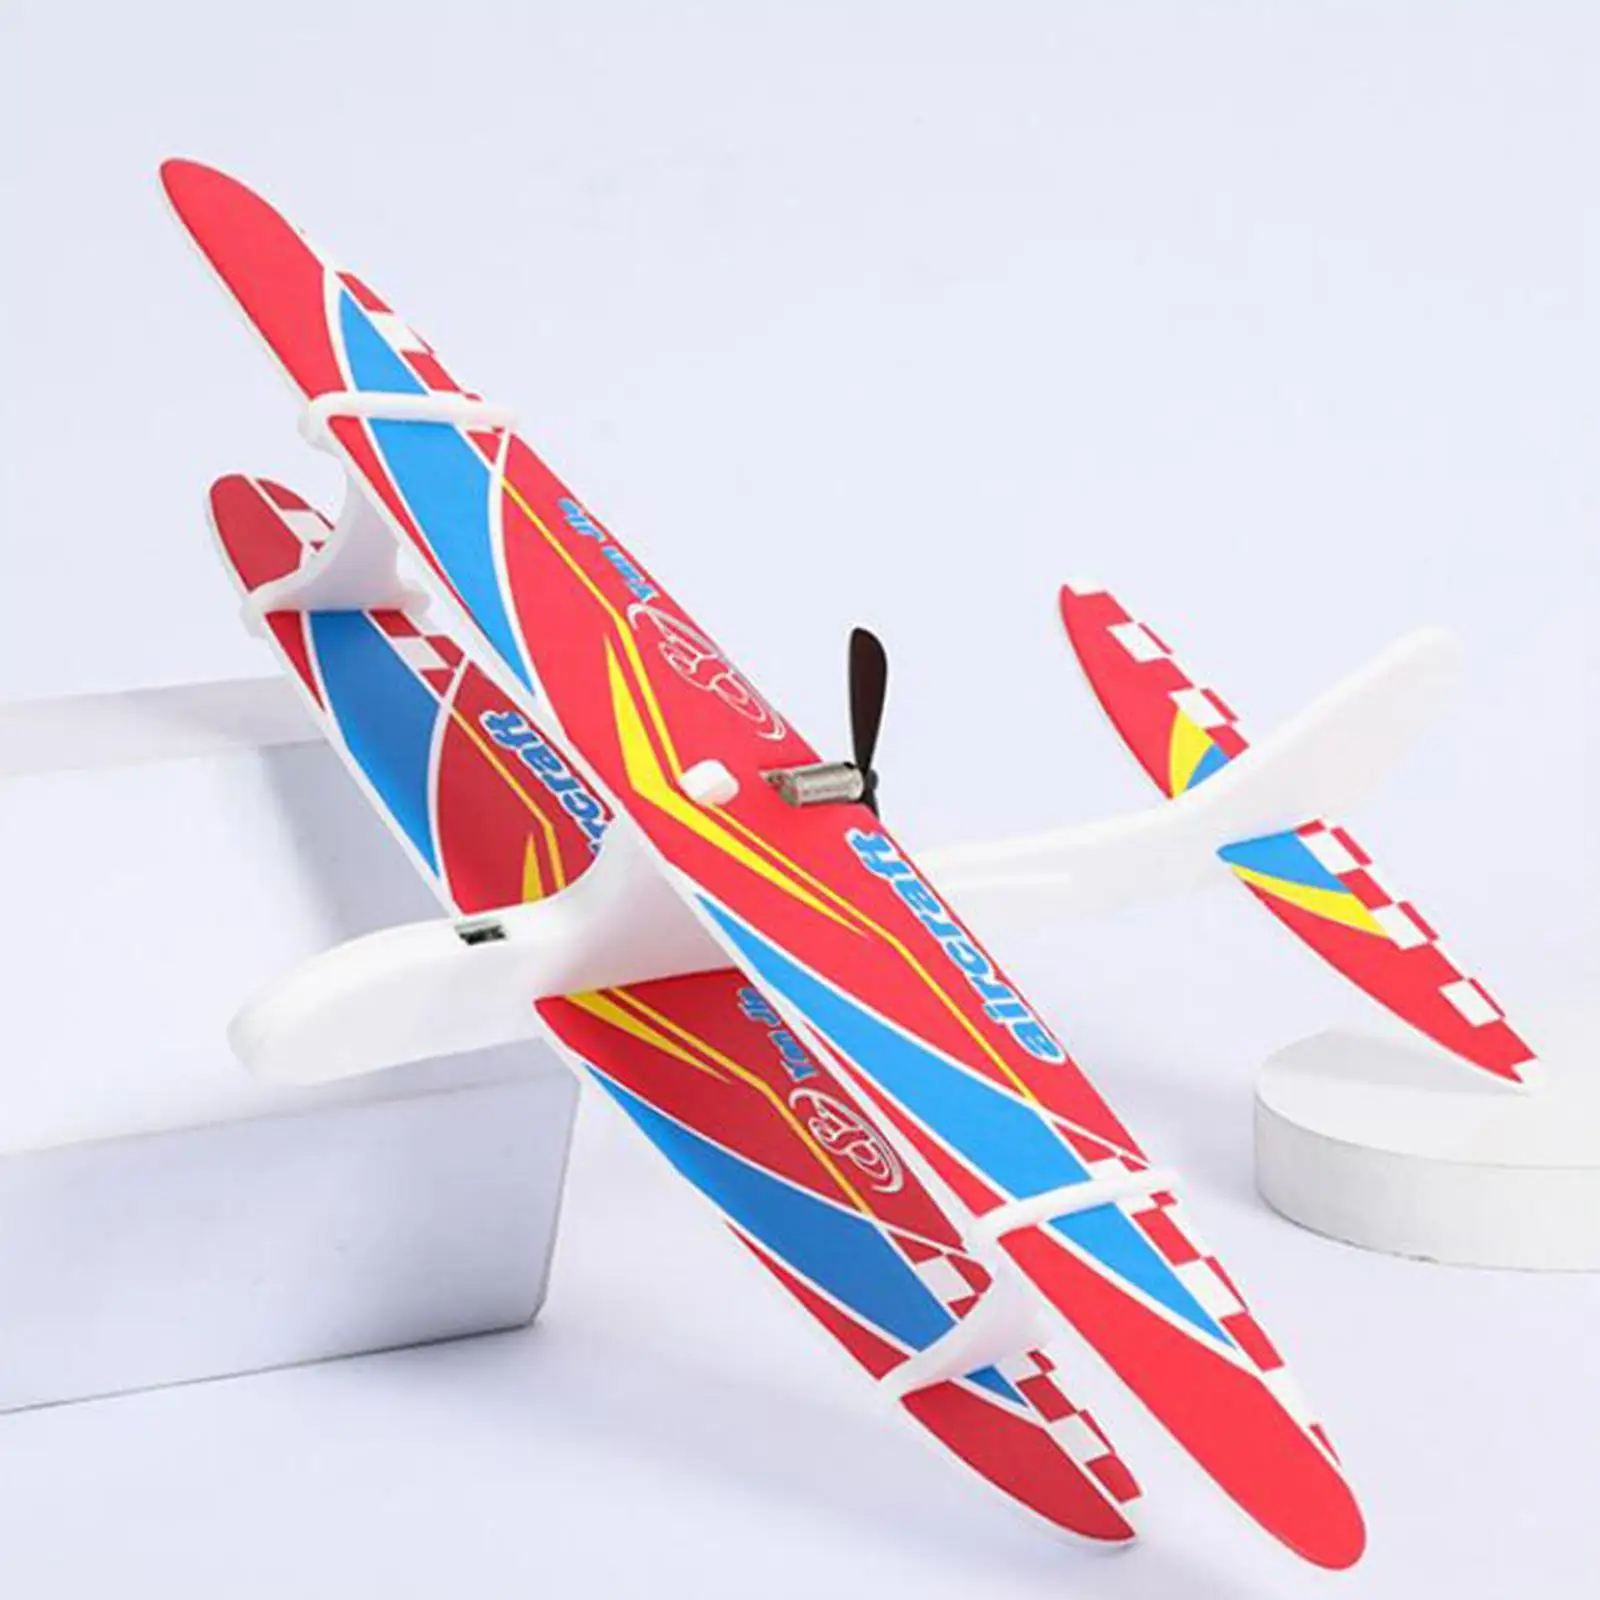 Electric Foam Aircraft Outdoor Sport game toy Lightweight Electric Hand Throwing Glider Plane for Outdoor Toy Birthday Gifts